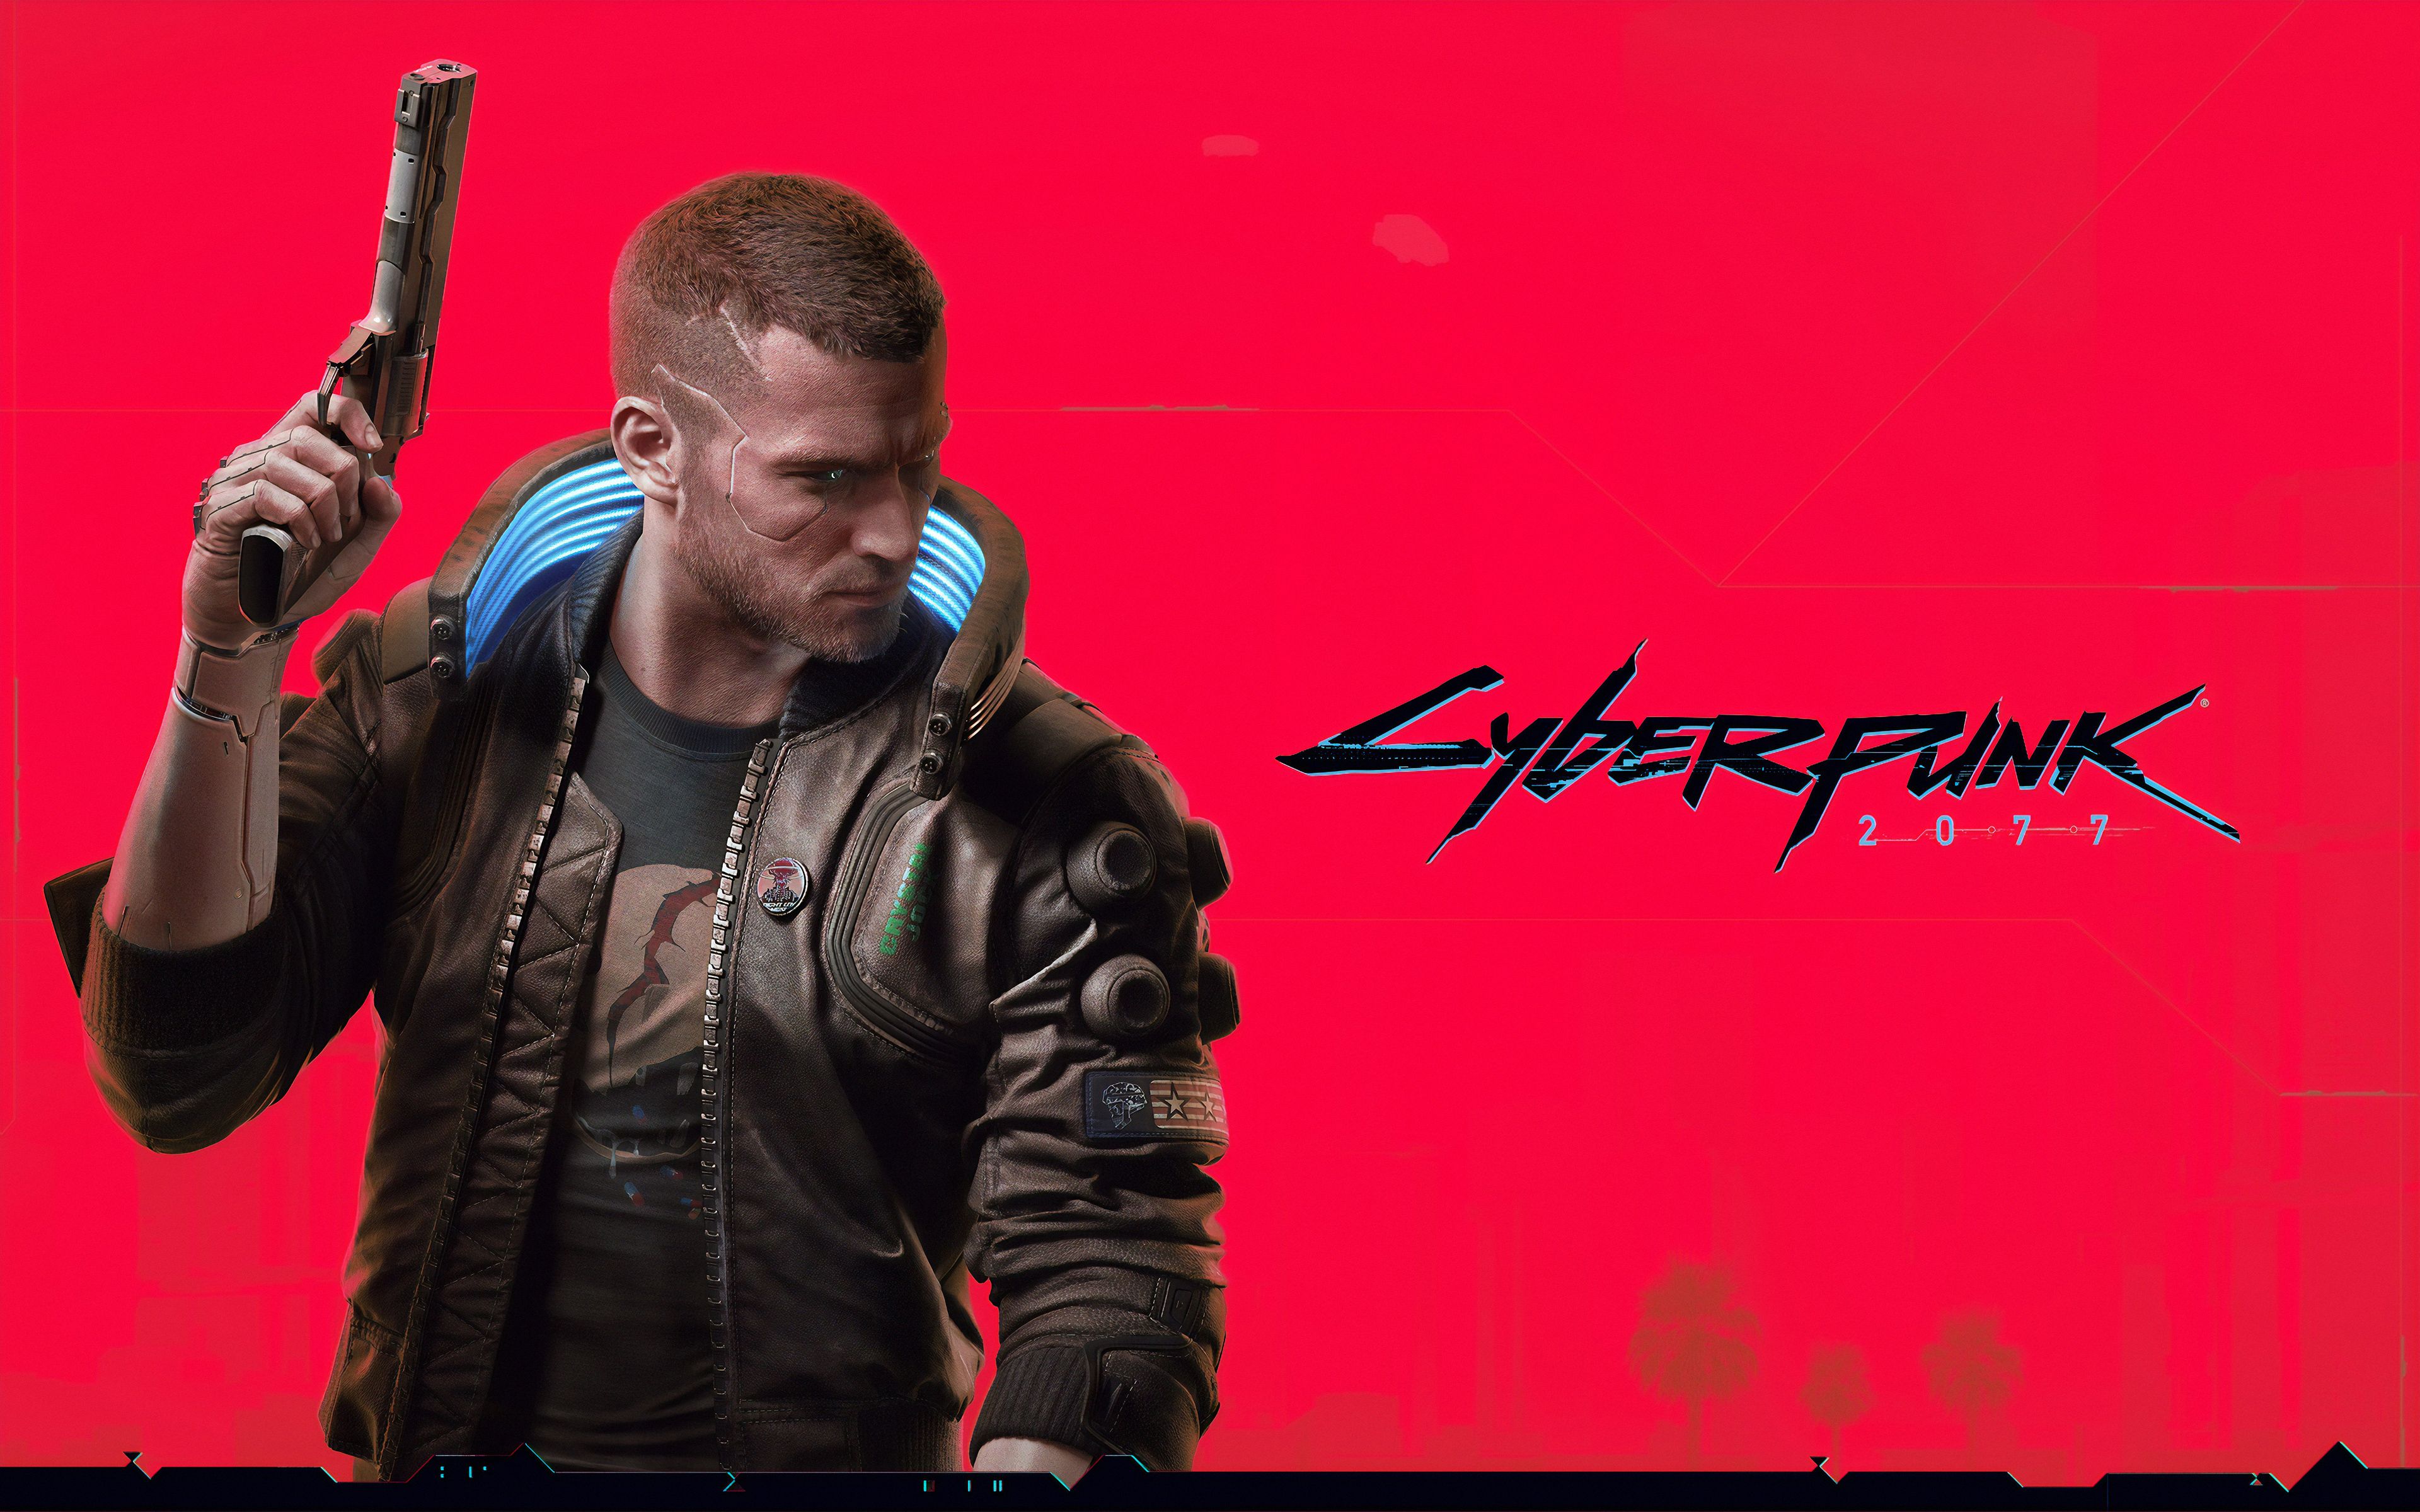 Cyberpunk 2077 Official Poster HD Games Wallpapers, HD Wallpapers